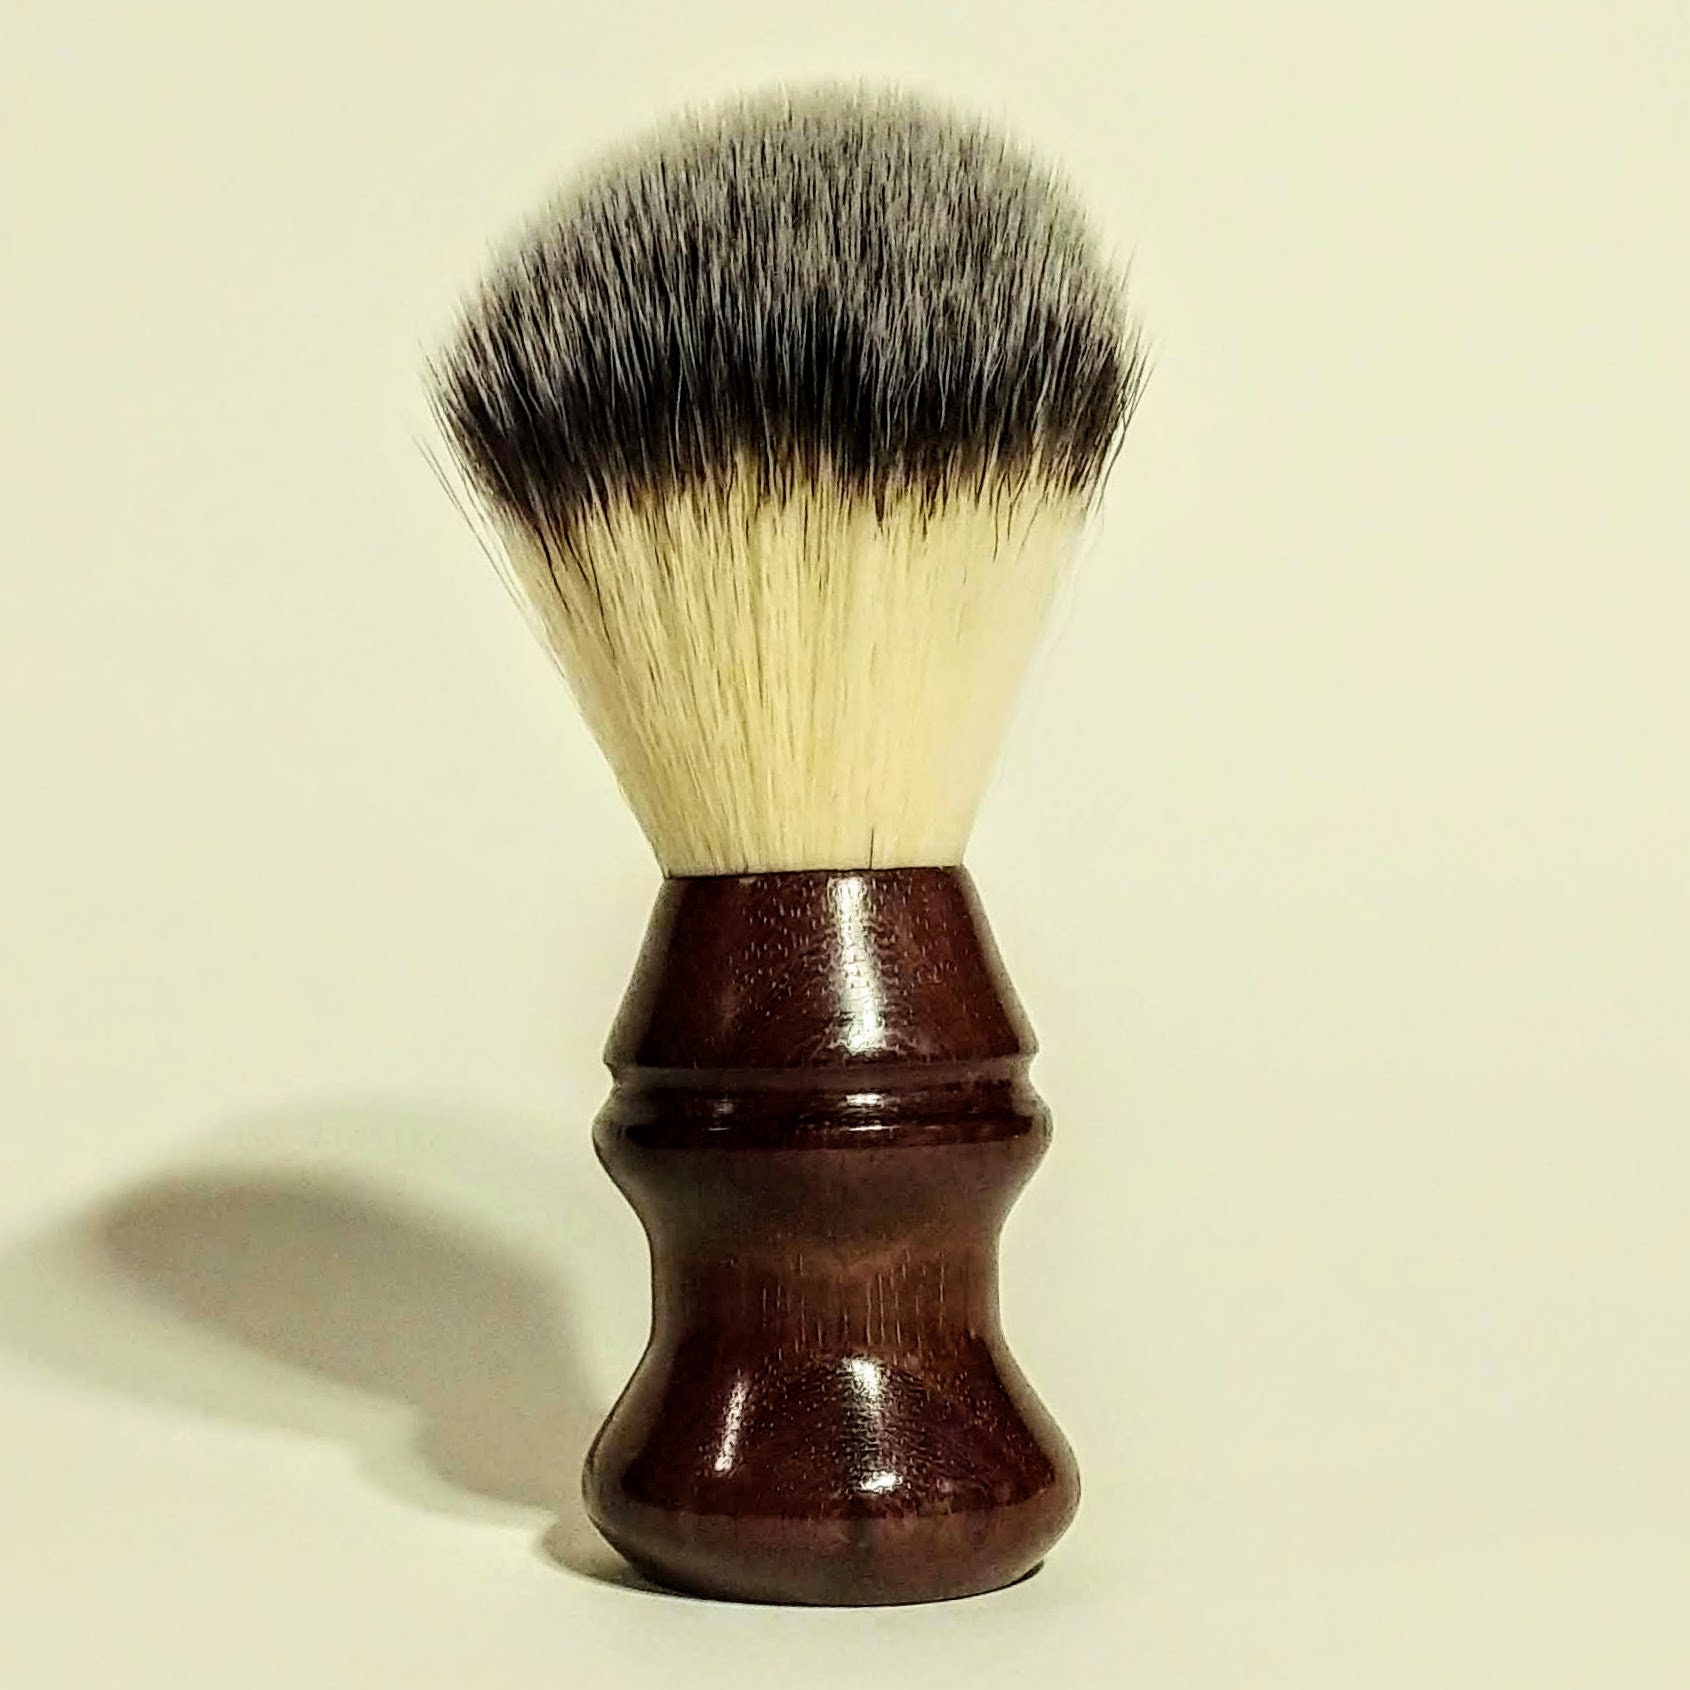 Shaving Brush - Hand-Turned Mexican Royal Ebony and Crafted with 100% Animal-Friendly  Bristles